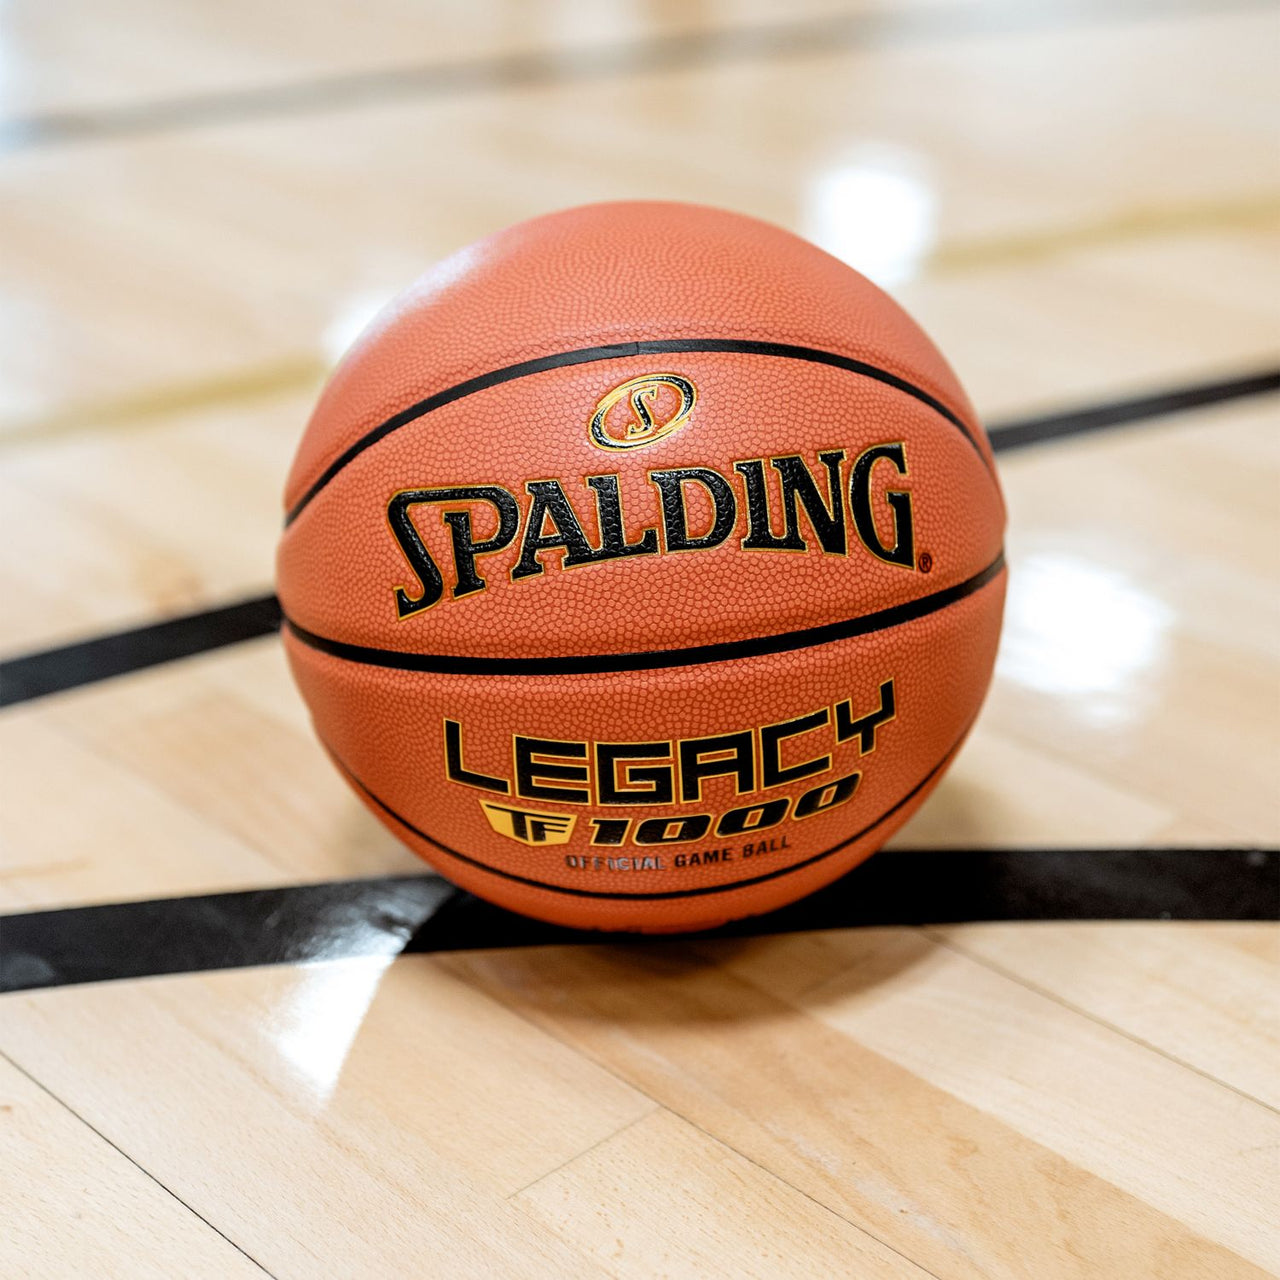 Spalding TF-1000 Legacy Official Basketball